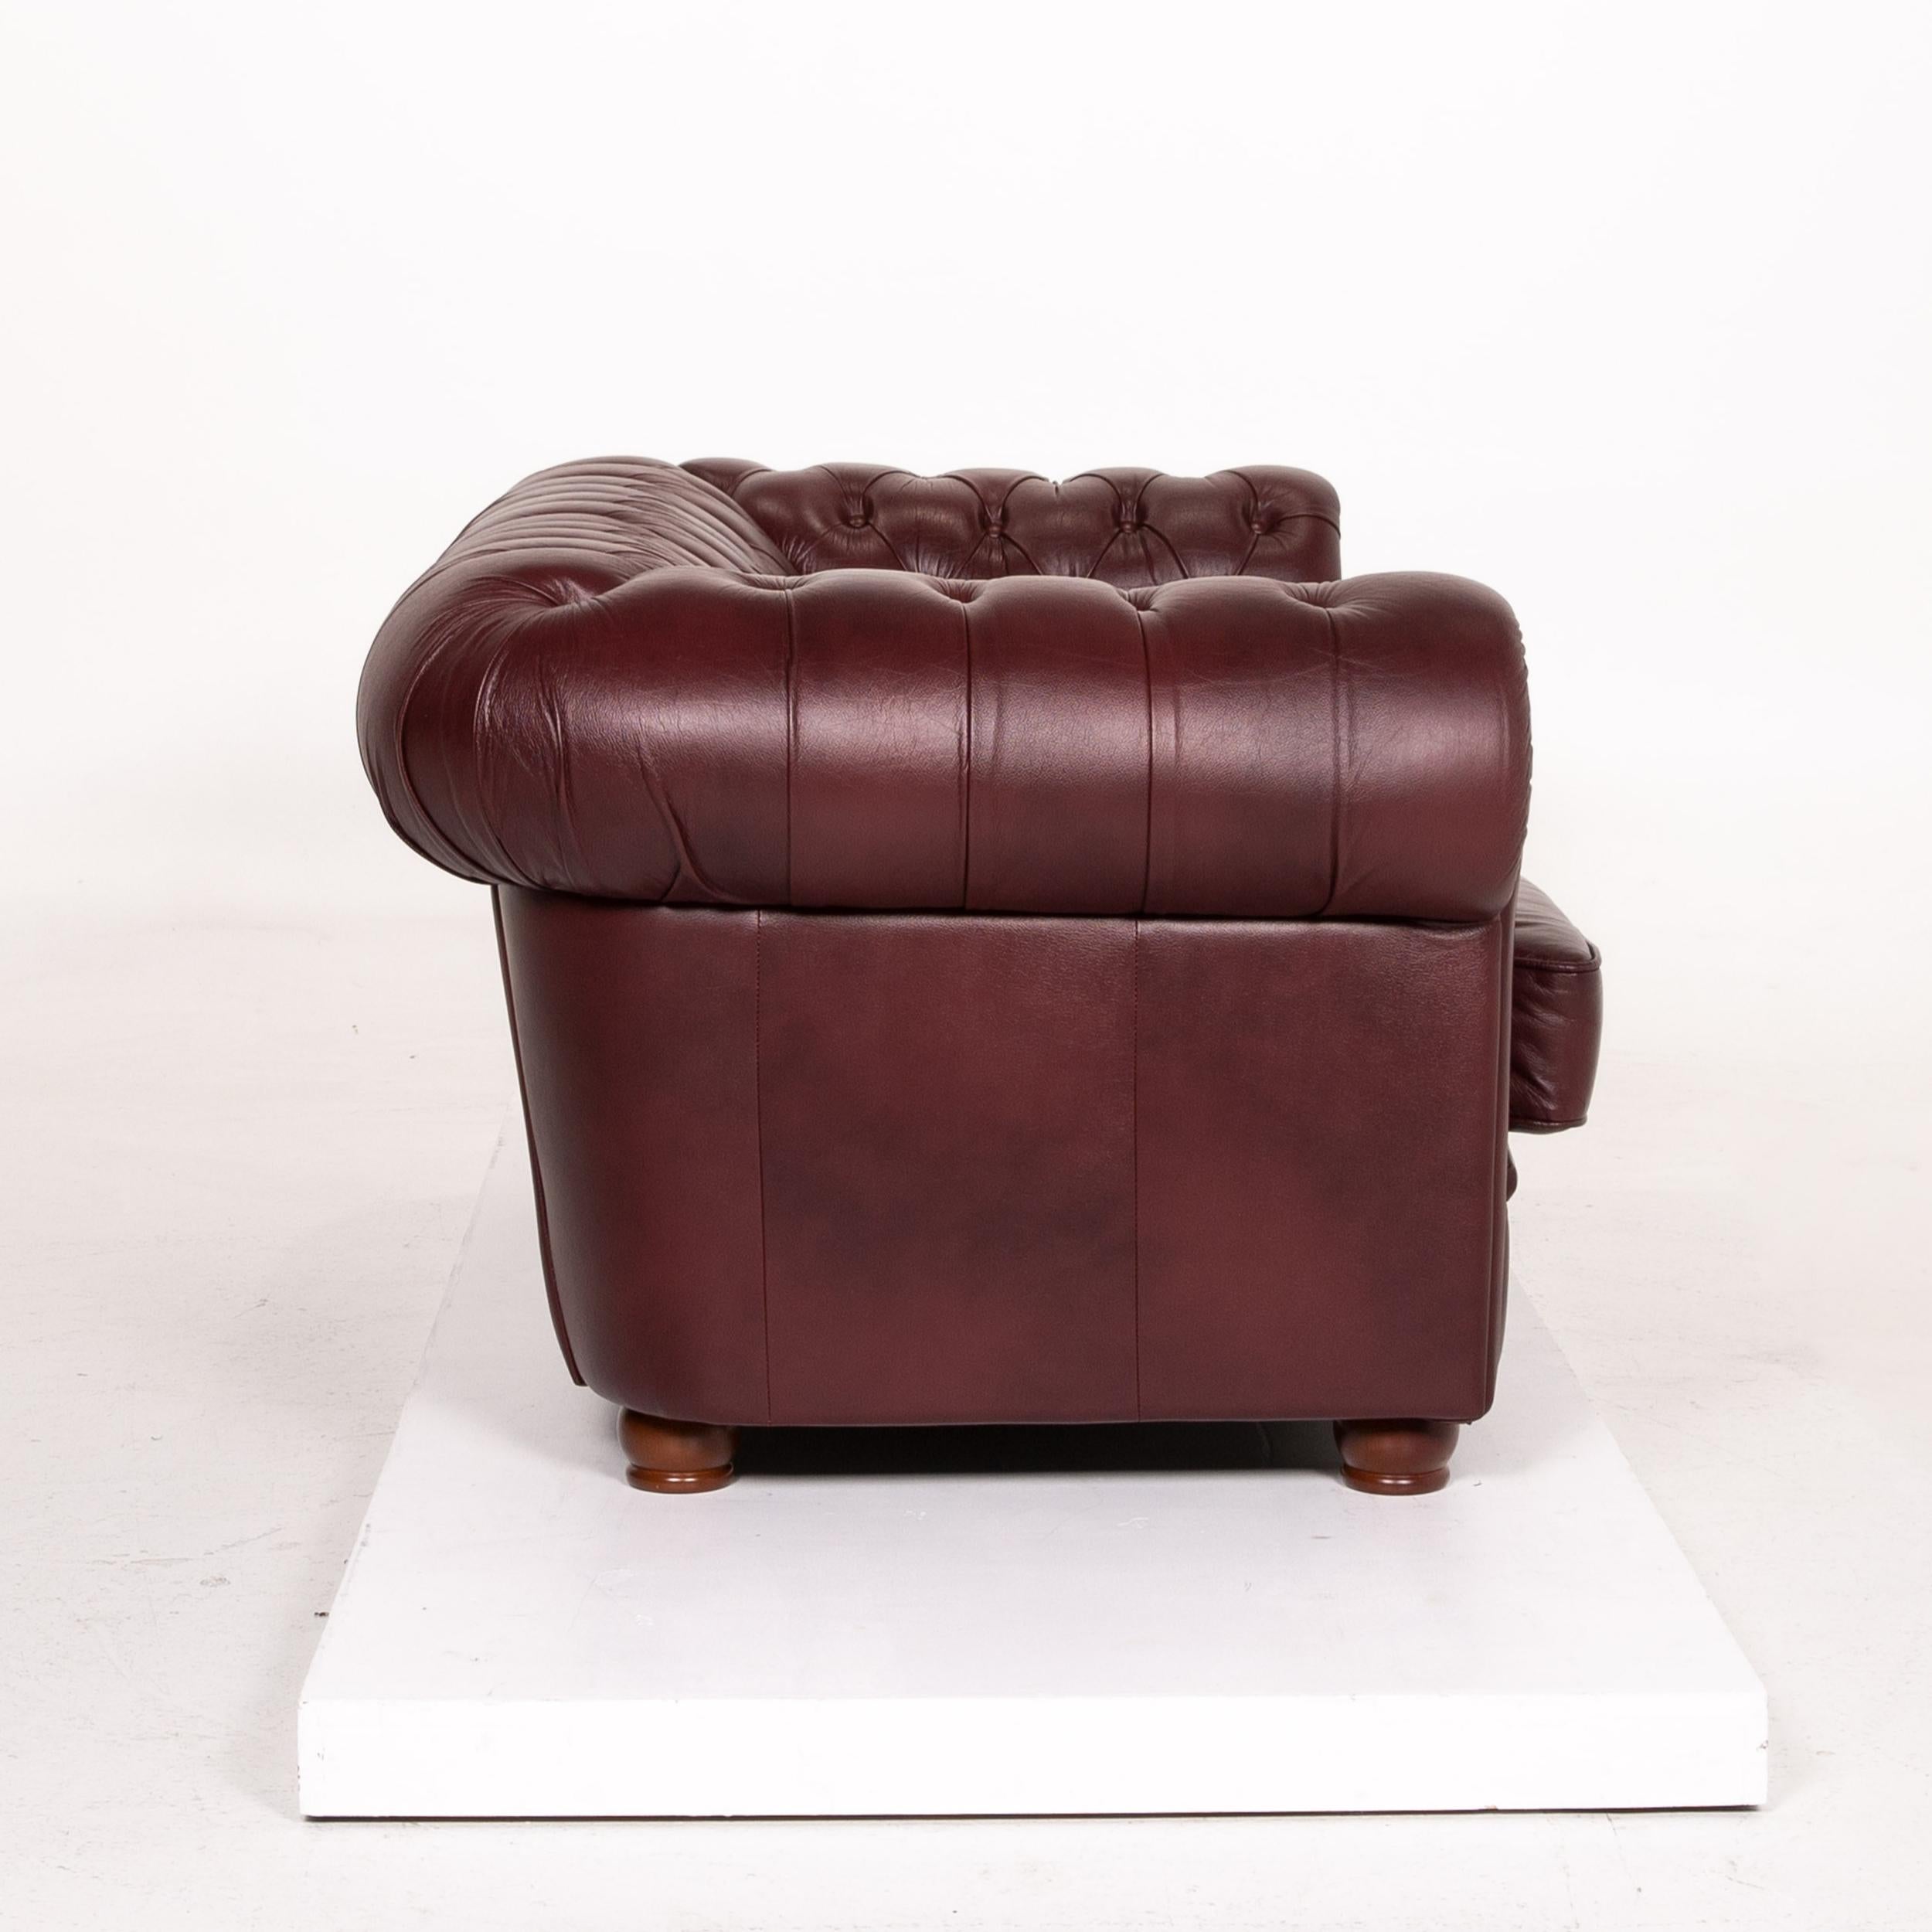 Chesterfield Leather Sofa Bordeaux Red Two-Seat Vintage Retro Couch In Good Condition For Sale In Cologne, DE